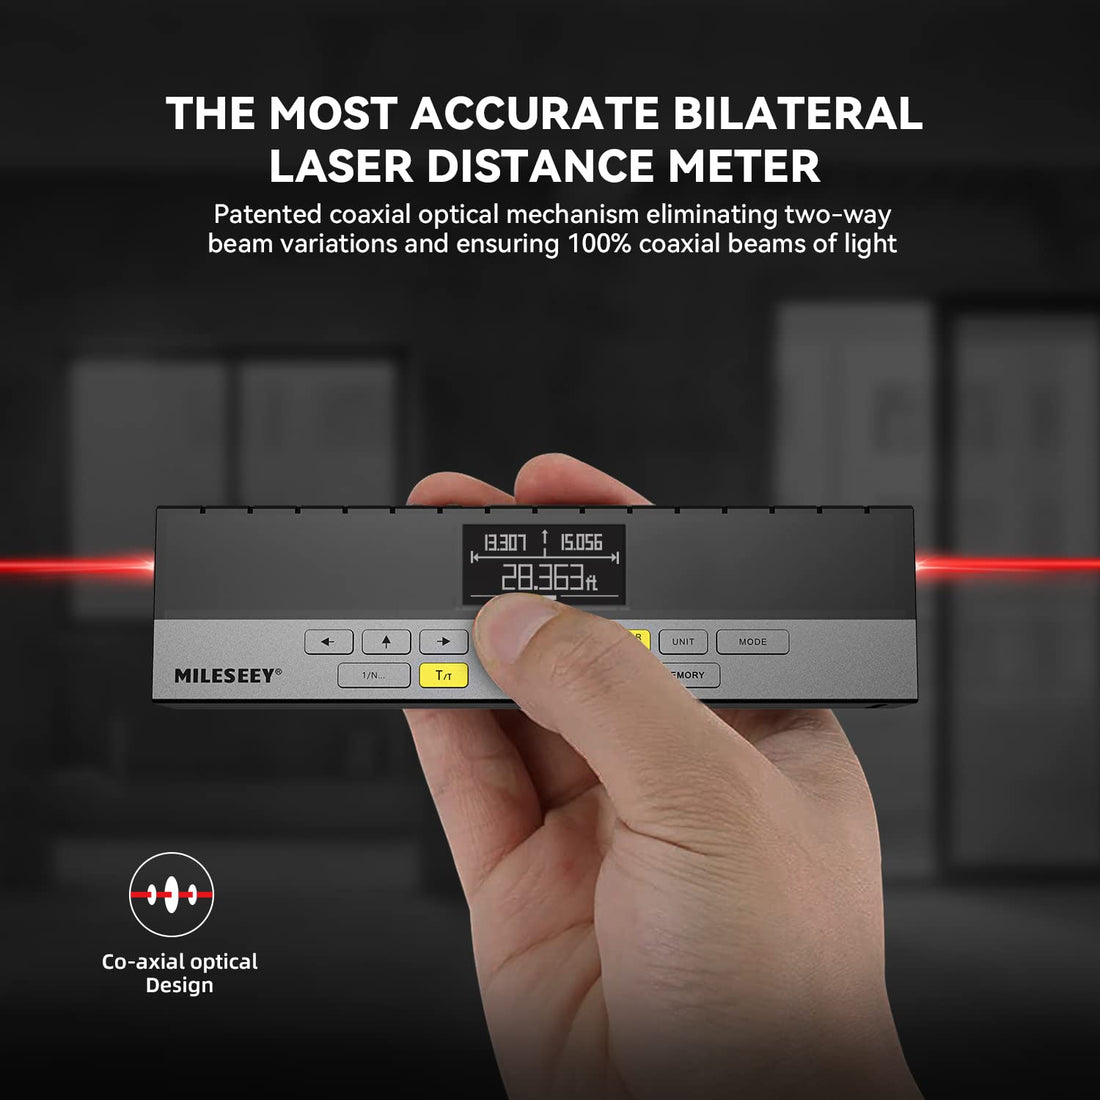 MiLESEEY Bilateral Laser Measurement Tool, 262Ft Laser Measure with Middle Laser Mark Beam, Multifunctional Laser Tape Measure with Digital Angle Level Rechargeable M/in/Ft Unit Switching